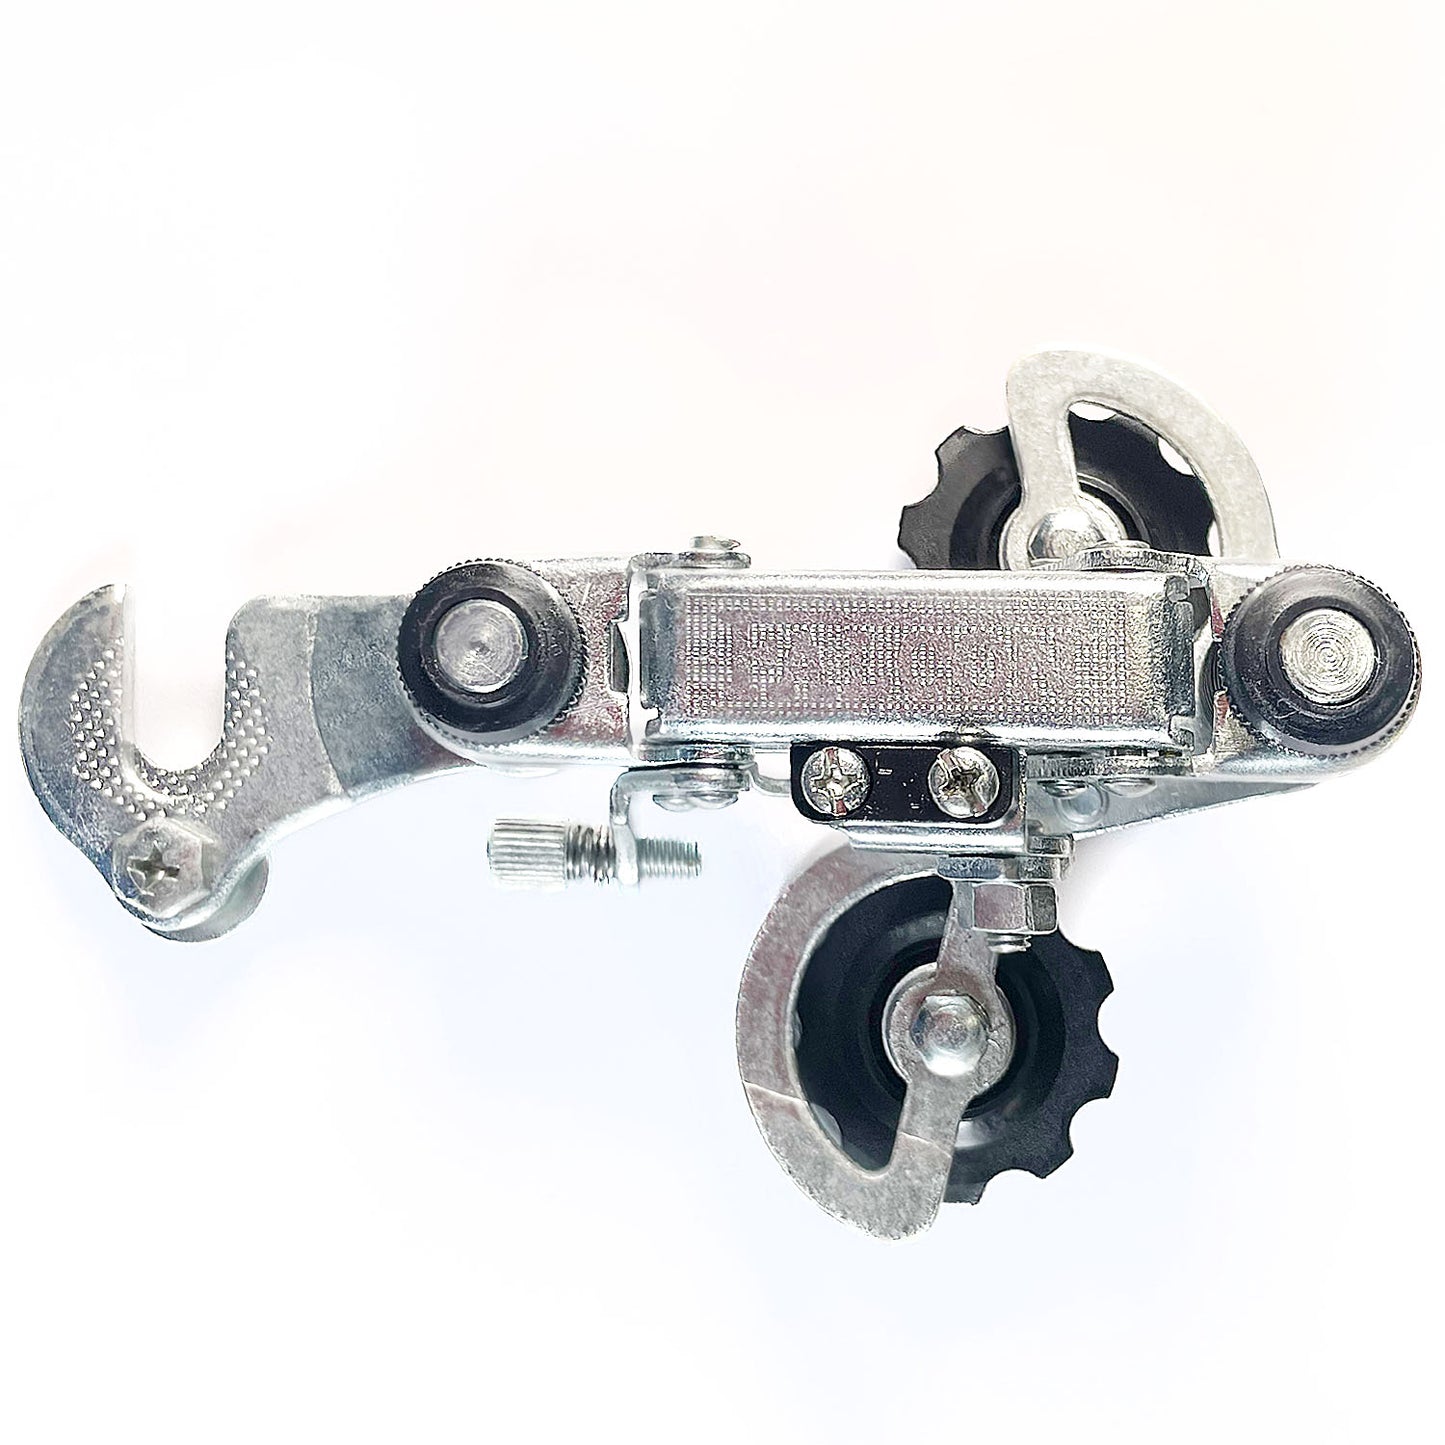 Bike Extras 5-12speed Rear Derailleur for Vintage Bicycle. - Zol Cycling